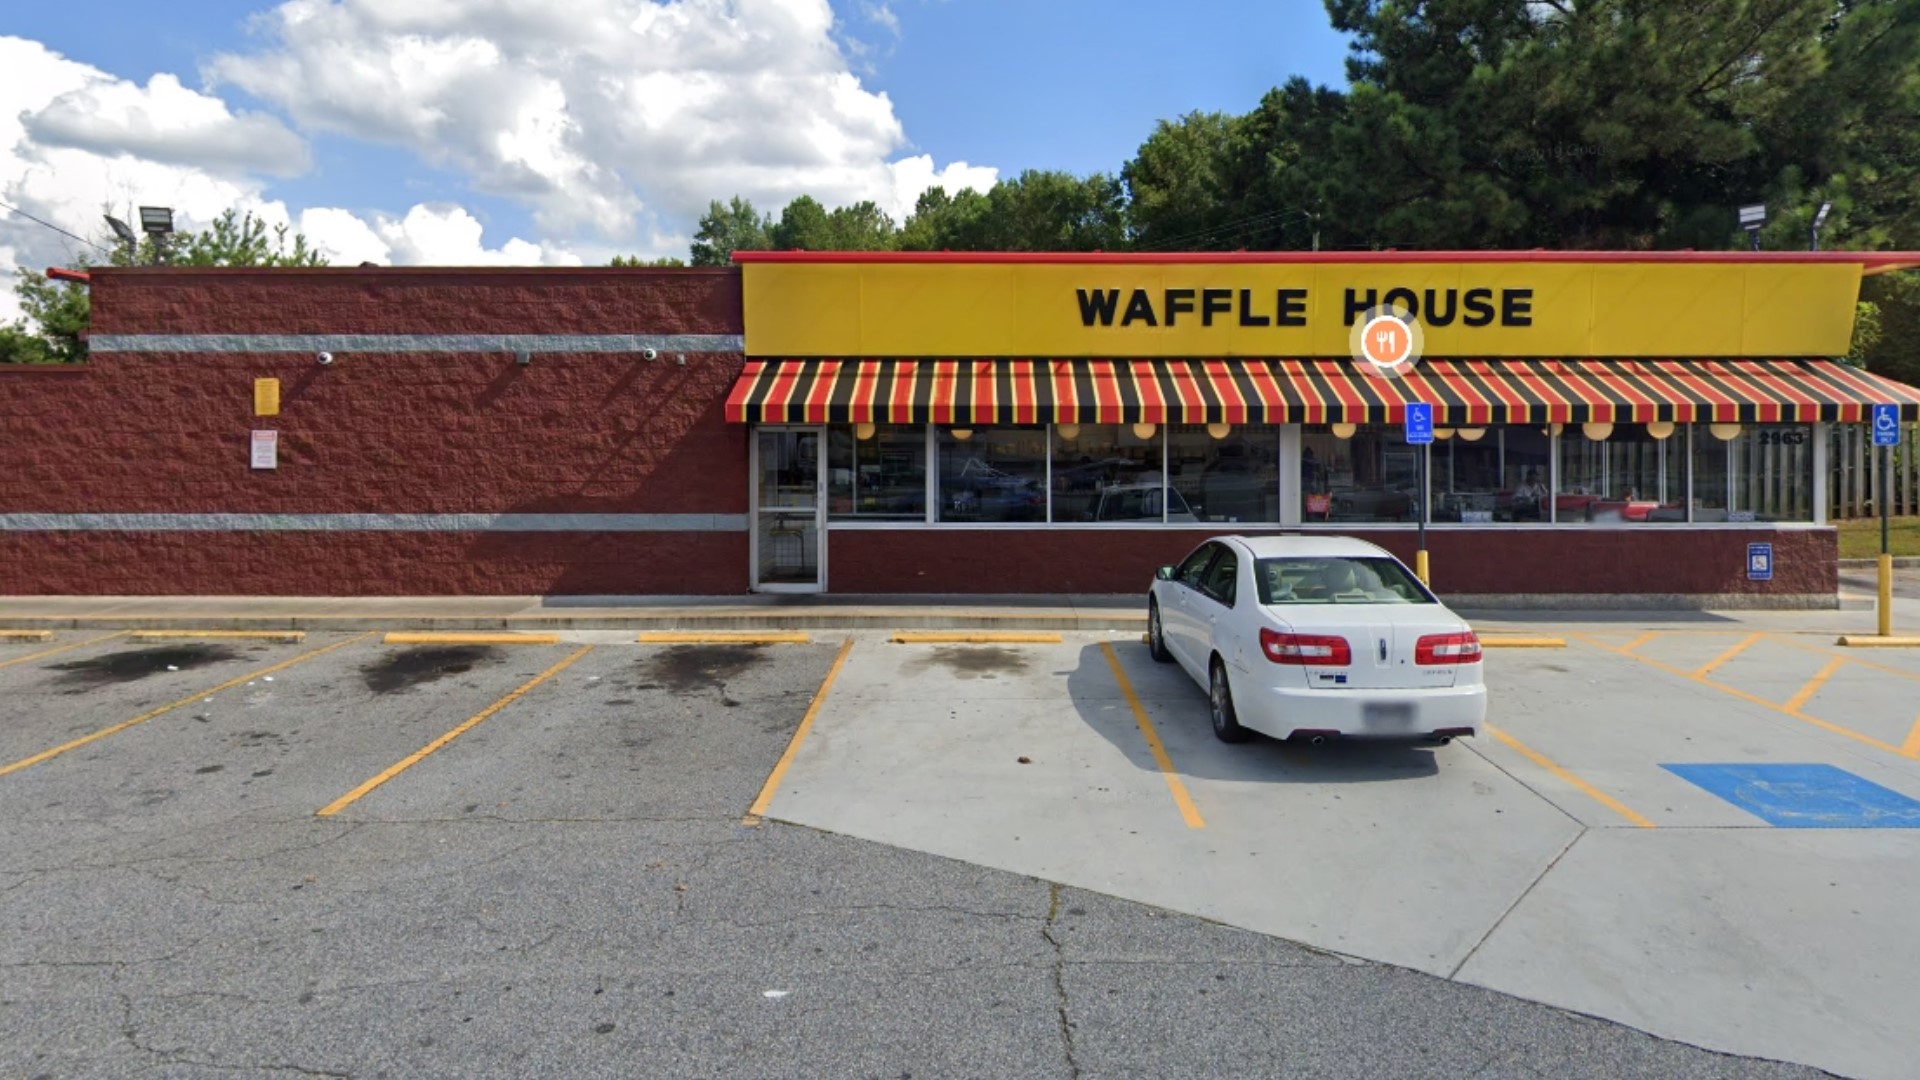 Authorities responded around 5:45 a.m. to the shooting at the Waffle House at 2963 Lawrenceville Hwy in Tucker, Georgia.